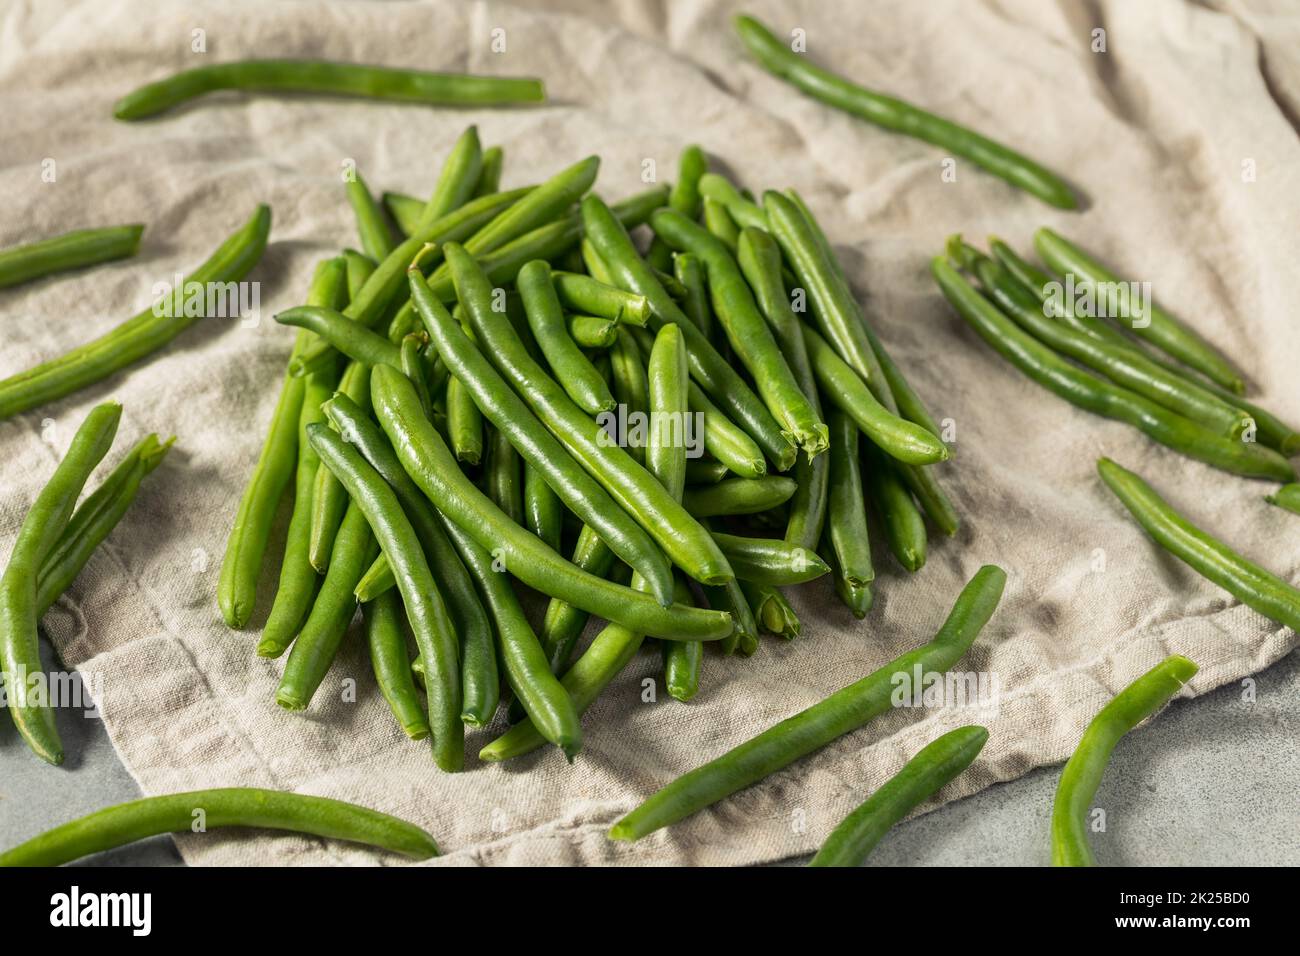 Raw Green Organic String Beans in a Bunch Stock Photo